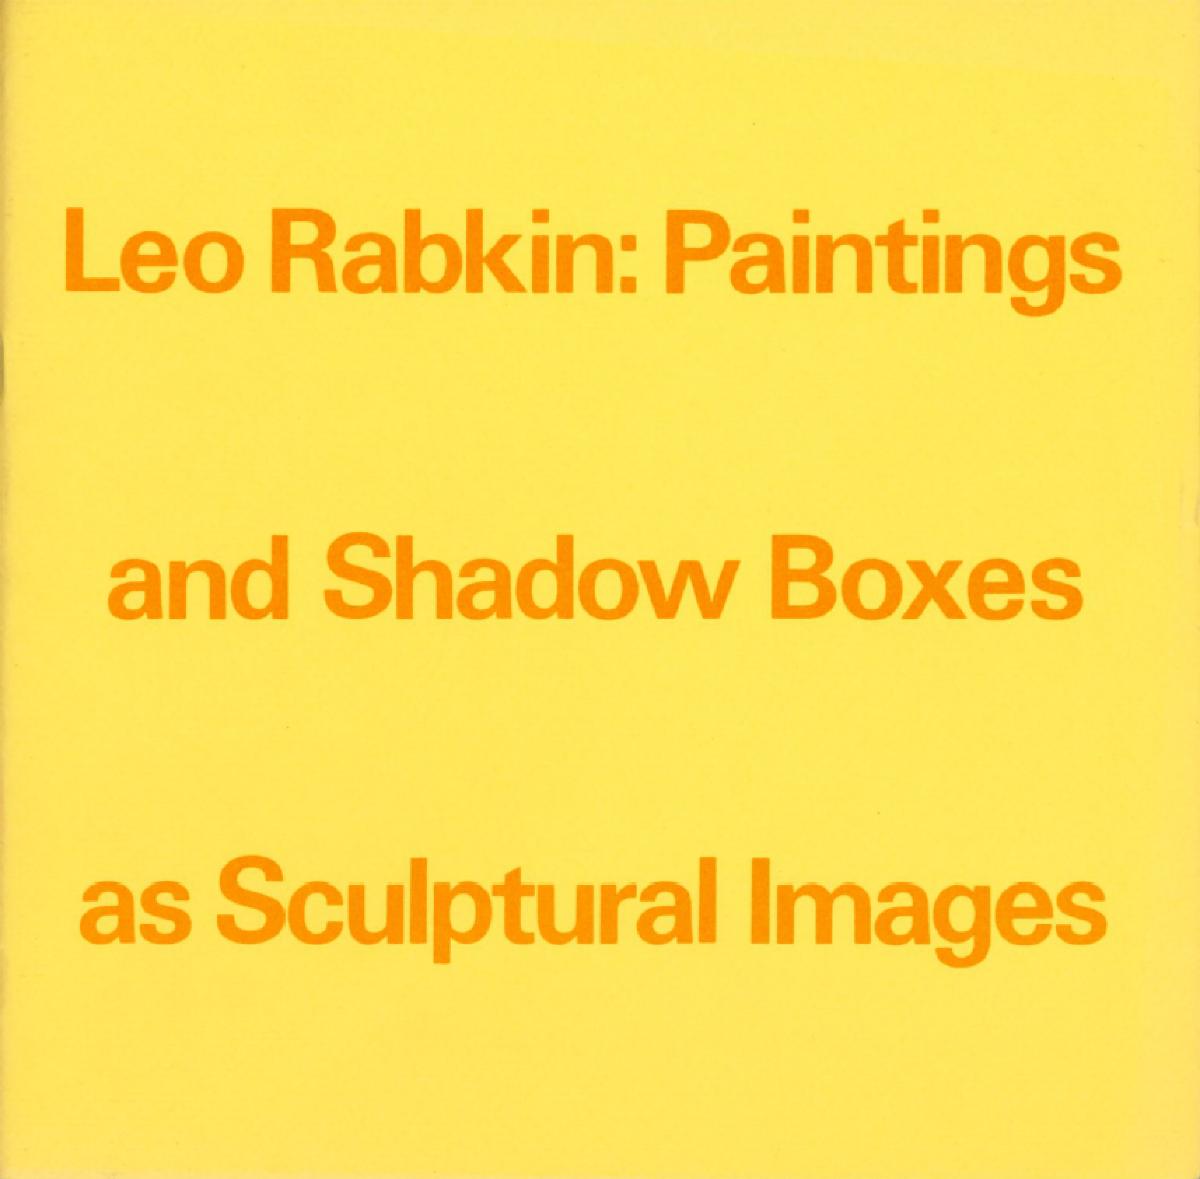 Leo Rabkin: Paintings and Shadow Boxes as Sculptural Images, May 3 – July 12, 1970, exhibition catalogue, cover